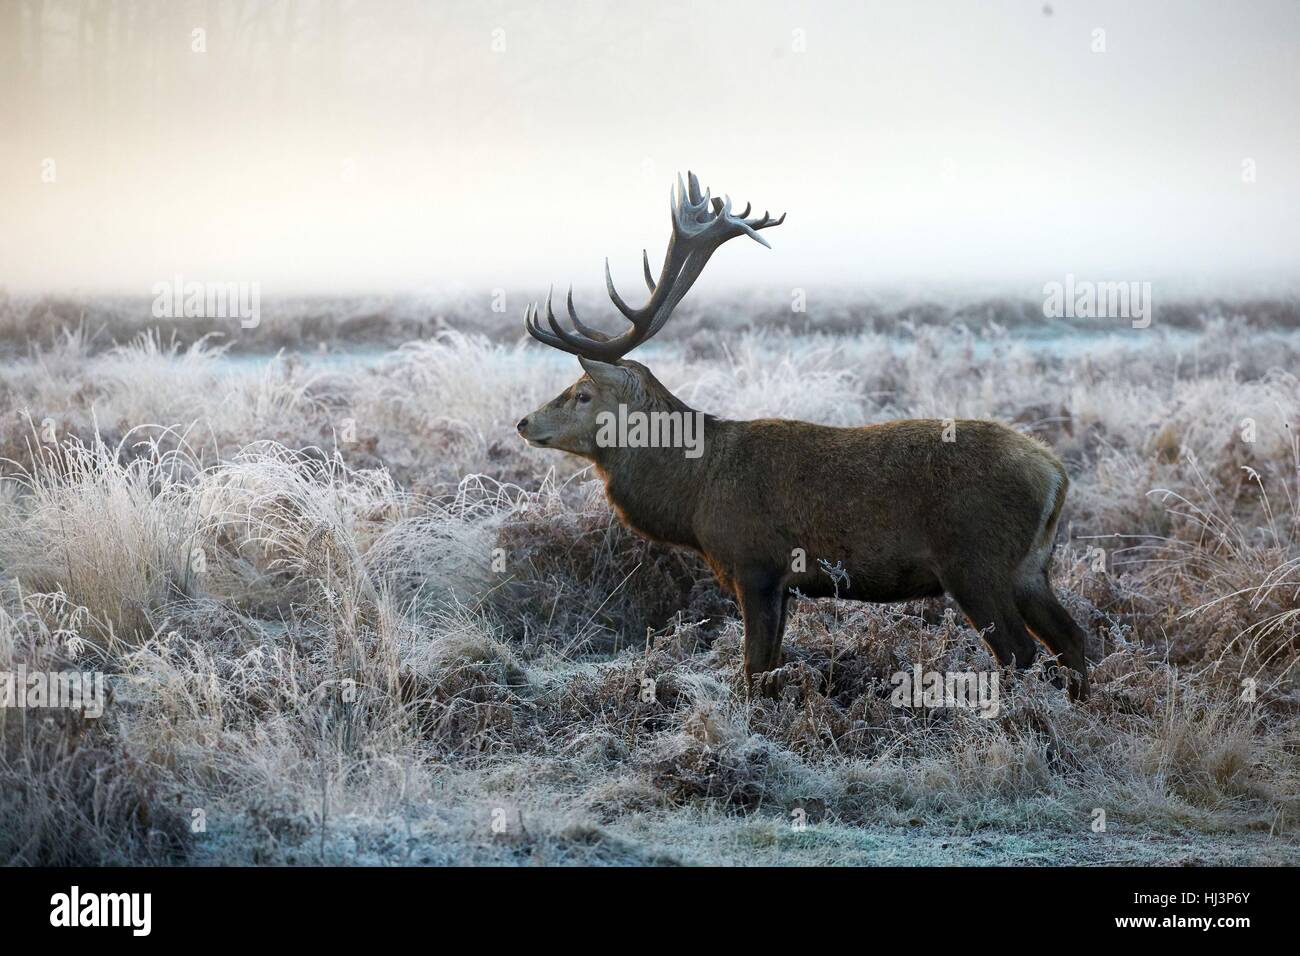 A deer stands in frost-covered grass in Richmond Park, south west London, as some rural areas are expected to see lows of minus 7C (19.4F) as the wintry weather continues, according to forecasters. Stock Photo